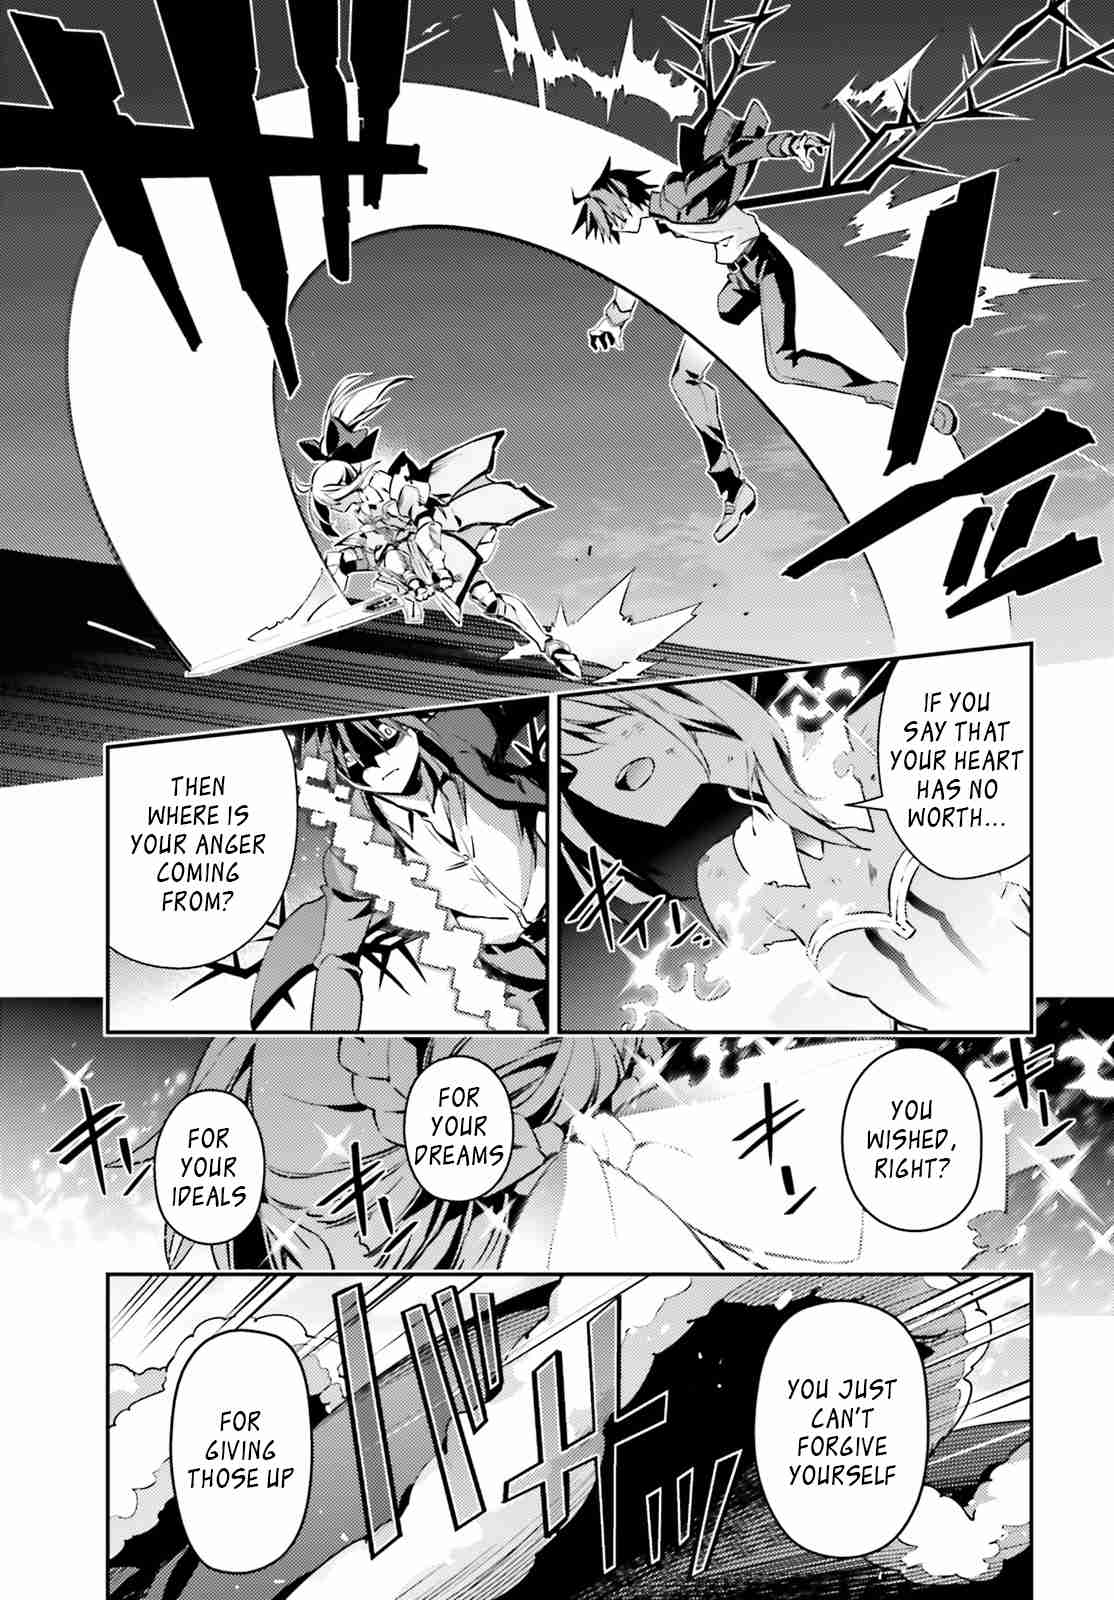 Fate/kaleid liner PRISMA☆ILLYA 3rei!! Ch. 53.4 The Boy and Girl's Lie